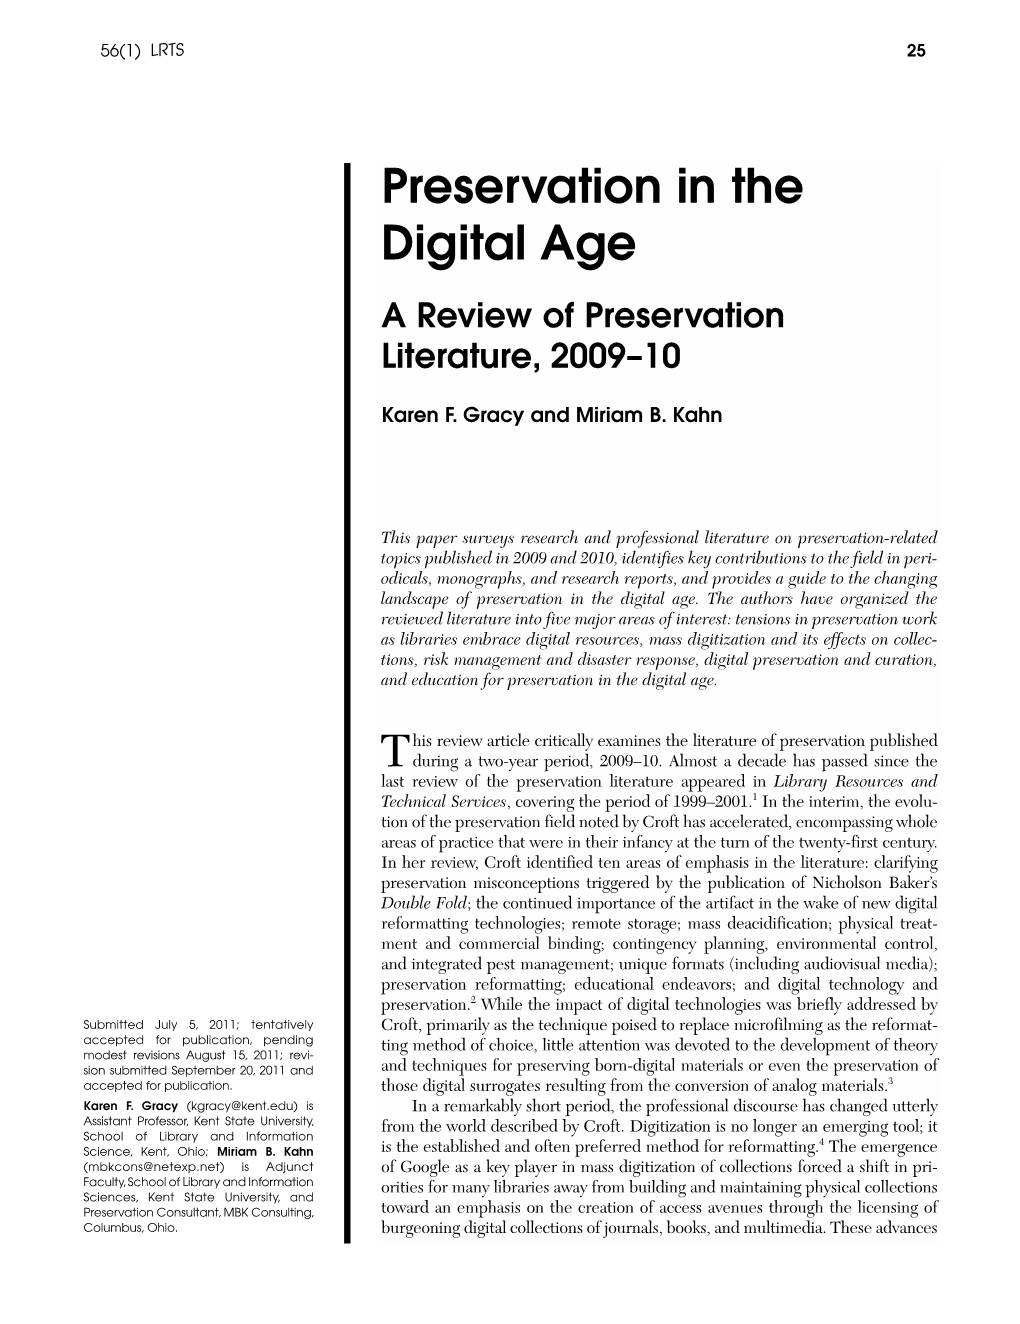 Preservation in the Digital Age a Review of Preservation Literature, 2009–10